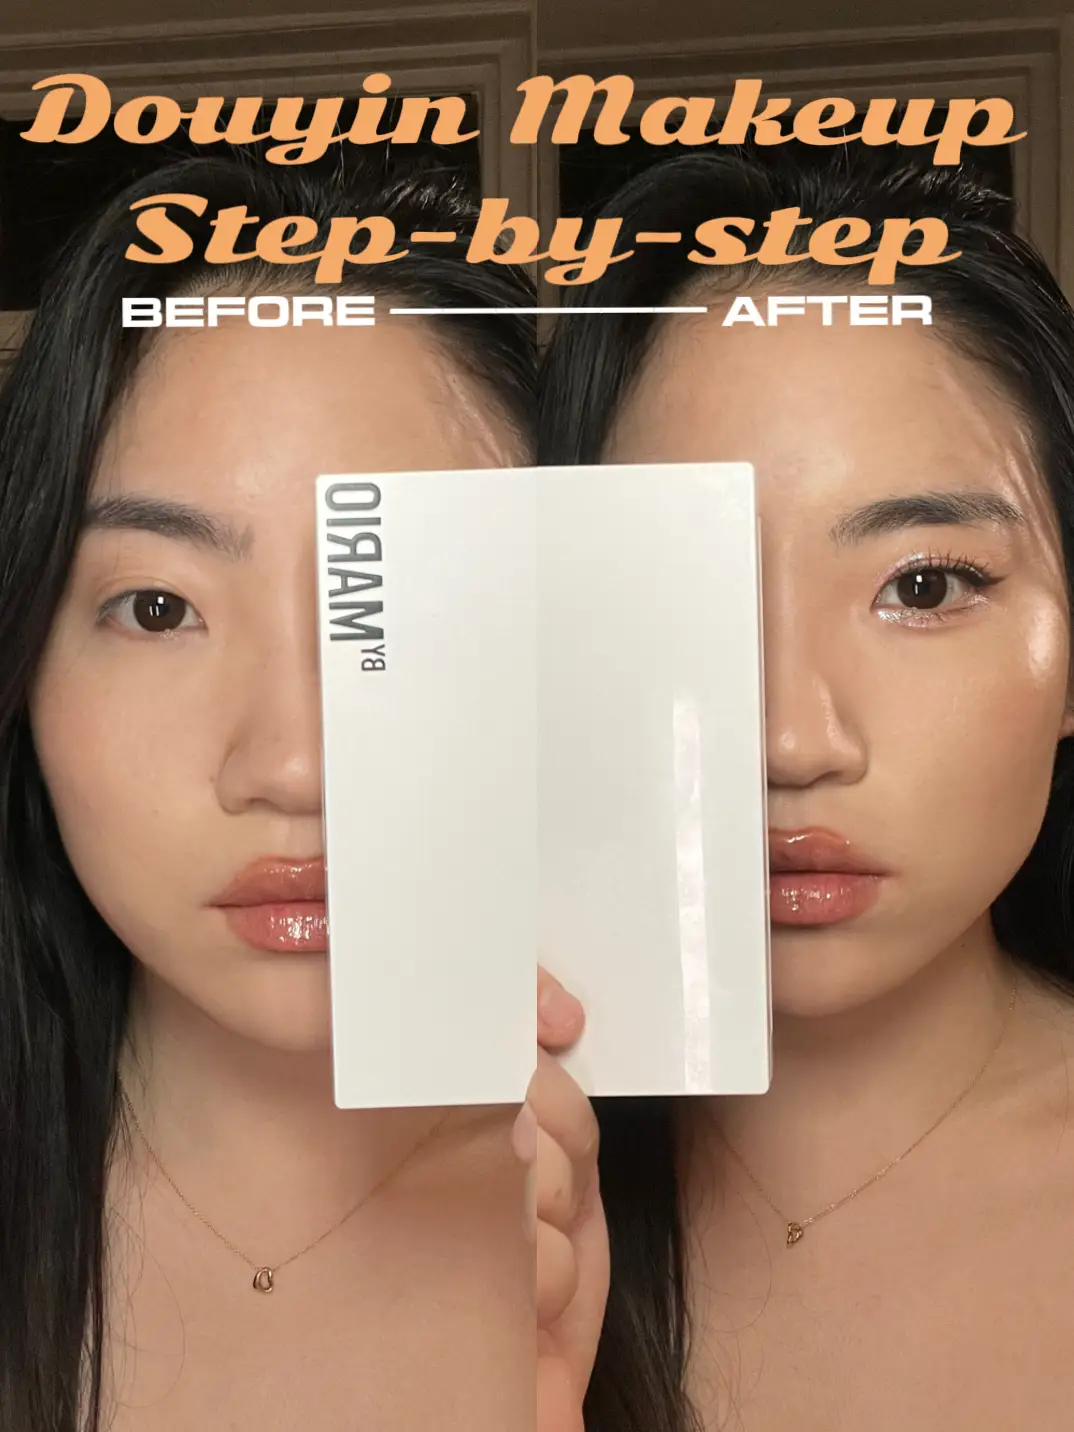 What Is The douyin Makeup Look And Why Is It Going Viral?